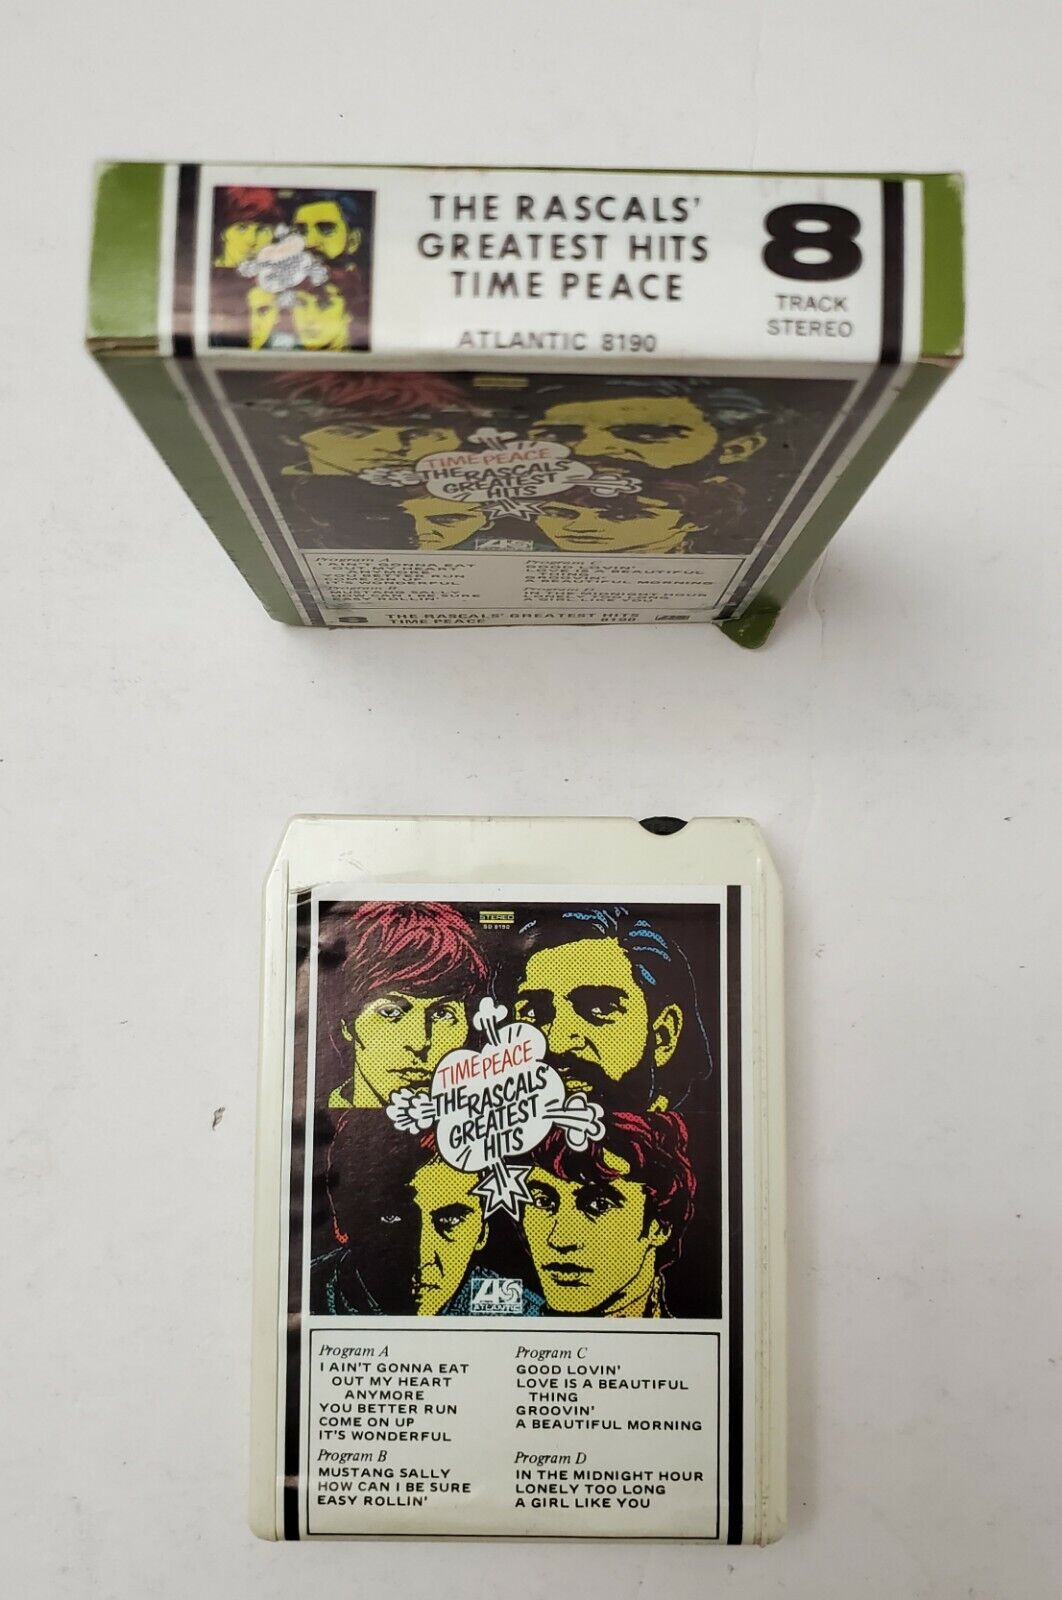 TIME PEACE: THE RASCALS' GREATEST HITS 8-TRACK CARTRIDGE COMPILATION CLASSIC